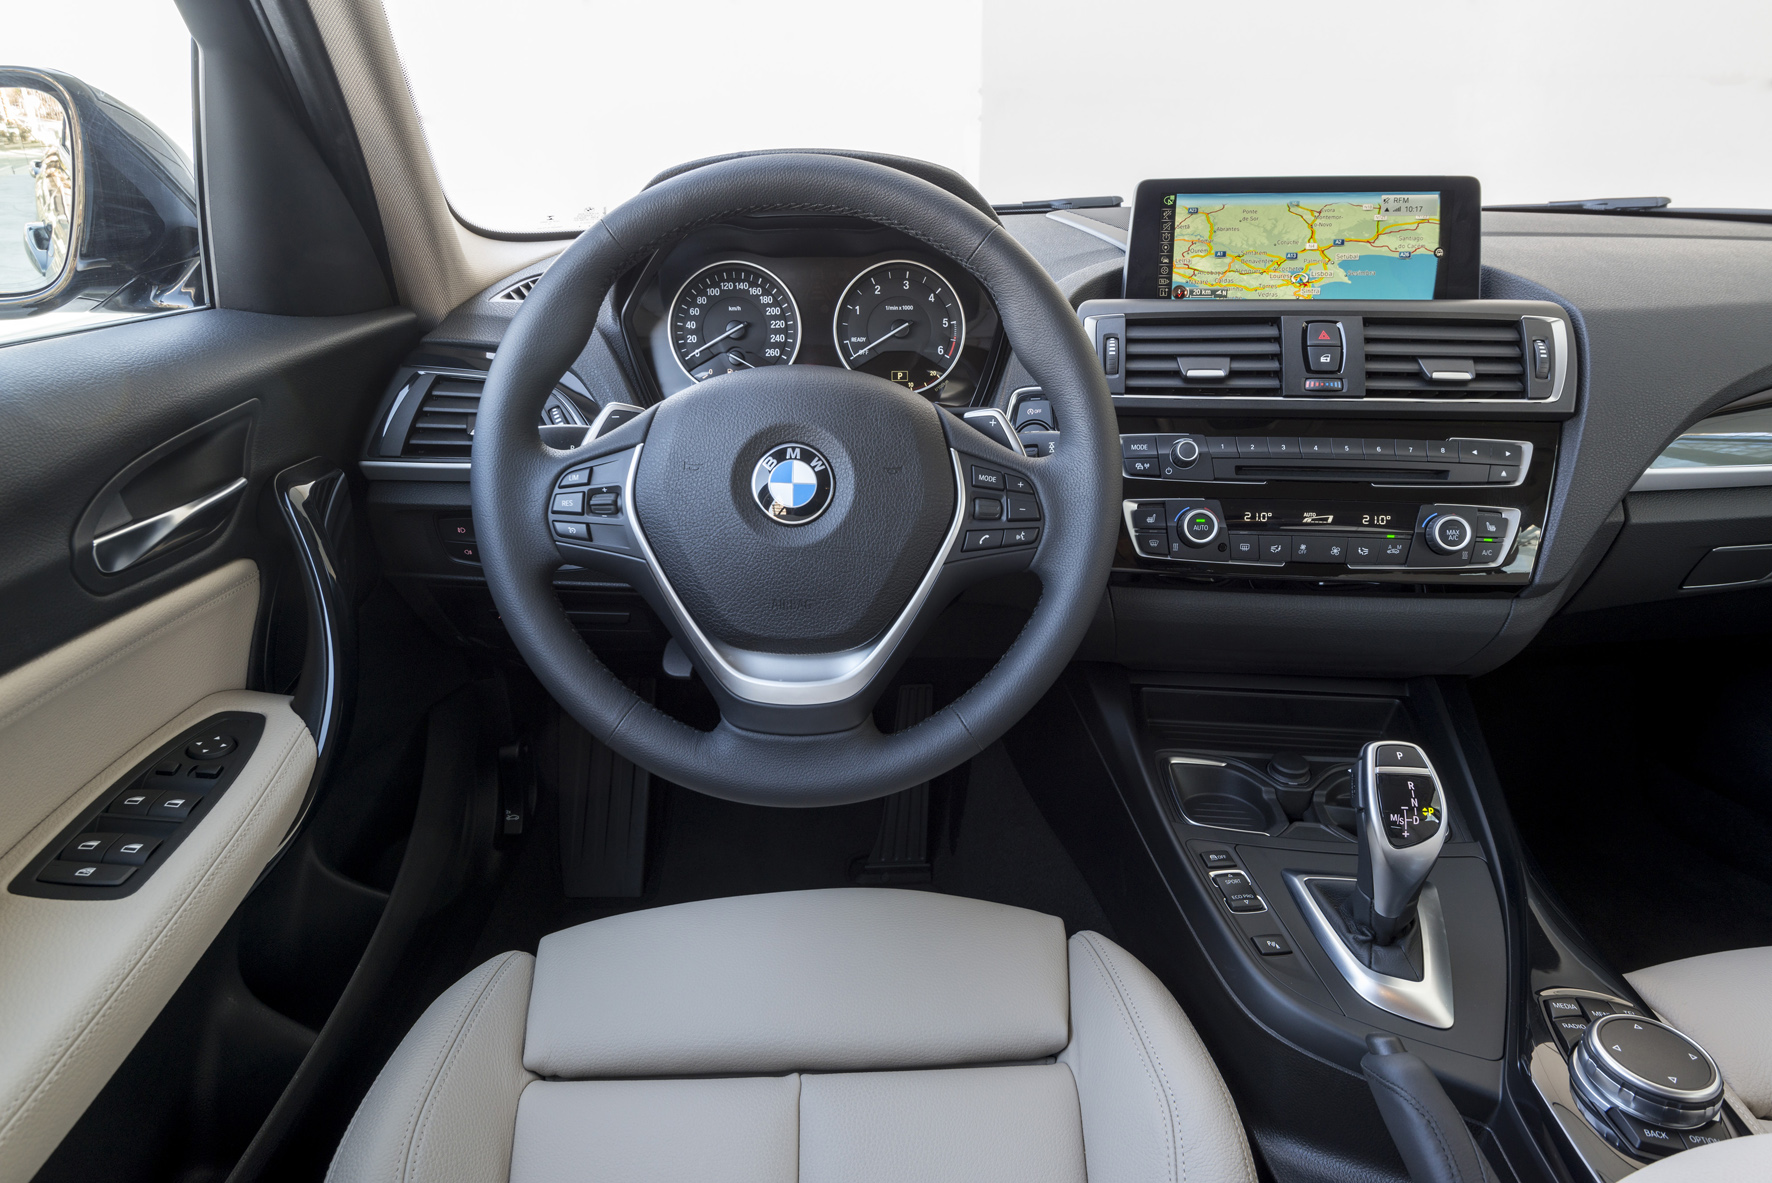 The drivers seat view in a BMW 1 Series